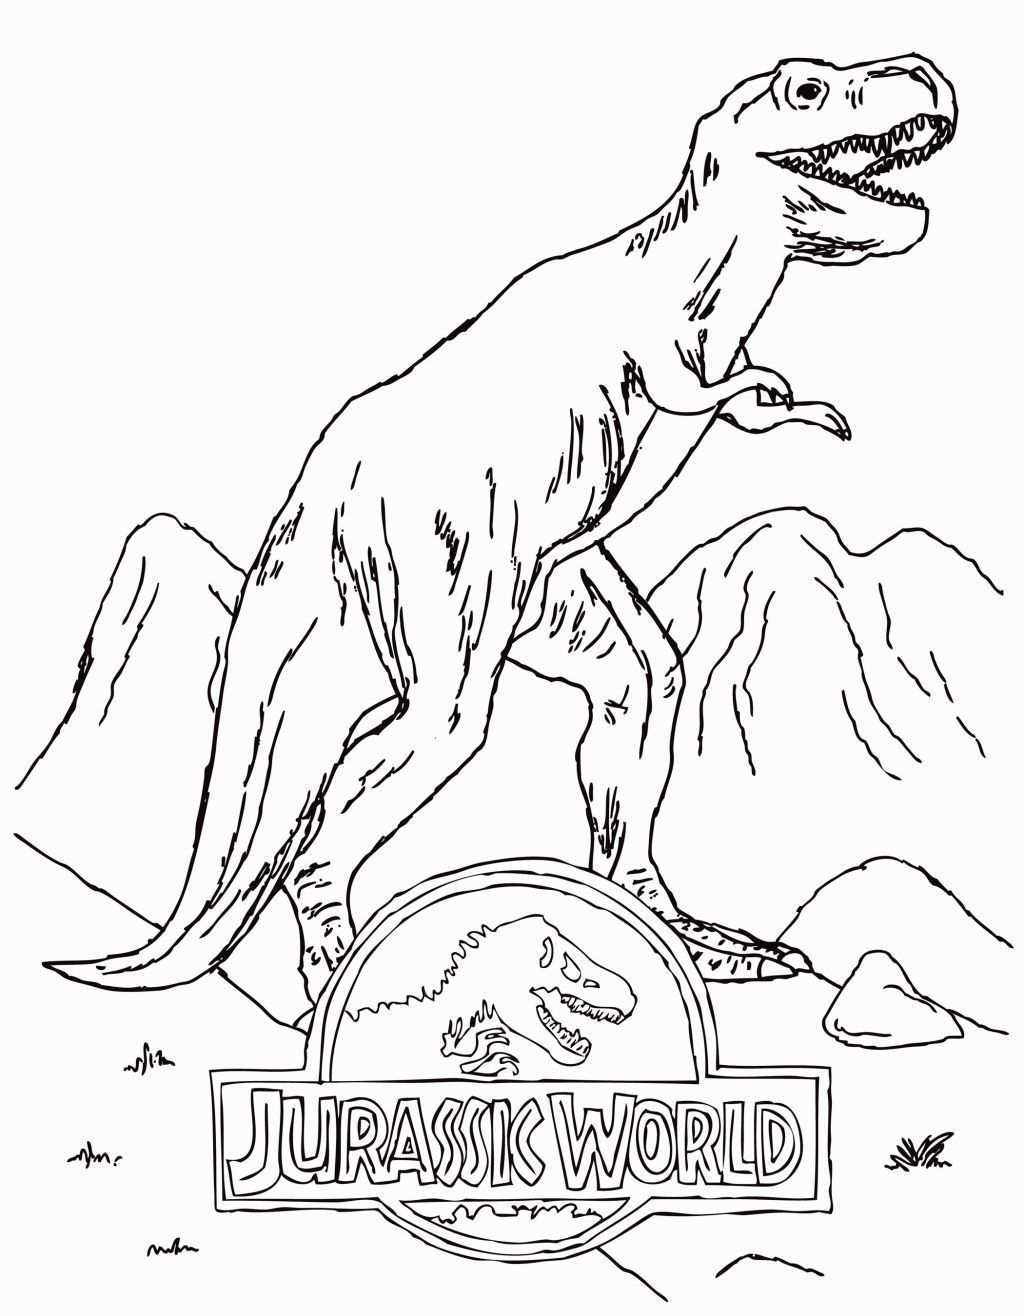 Jurassic World Coloring Pages Coloringnori Coloring Pages For Kids